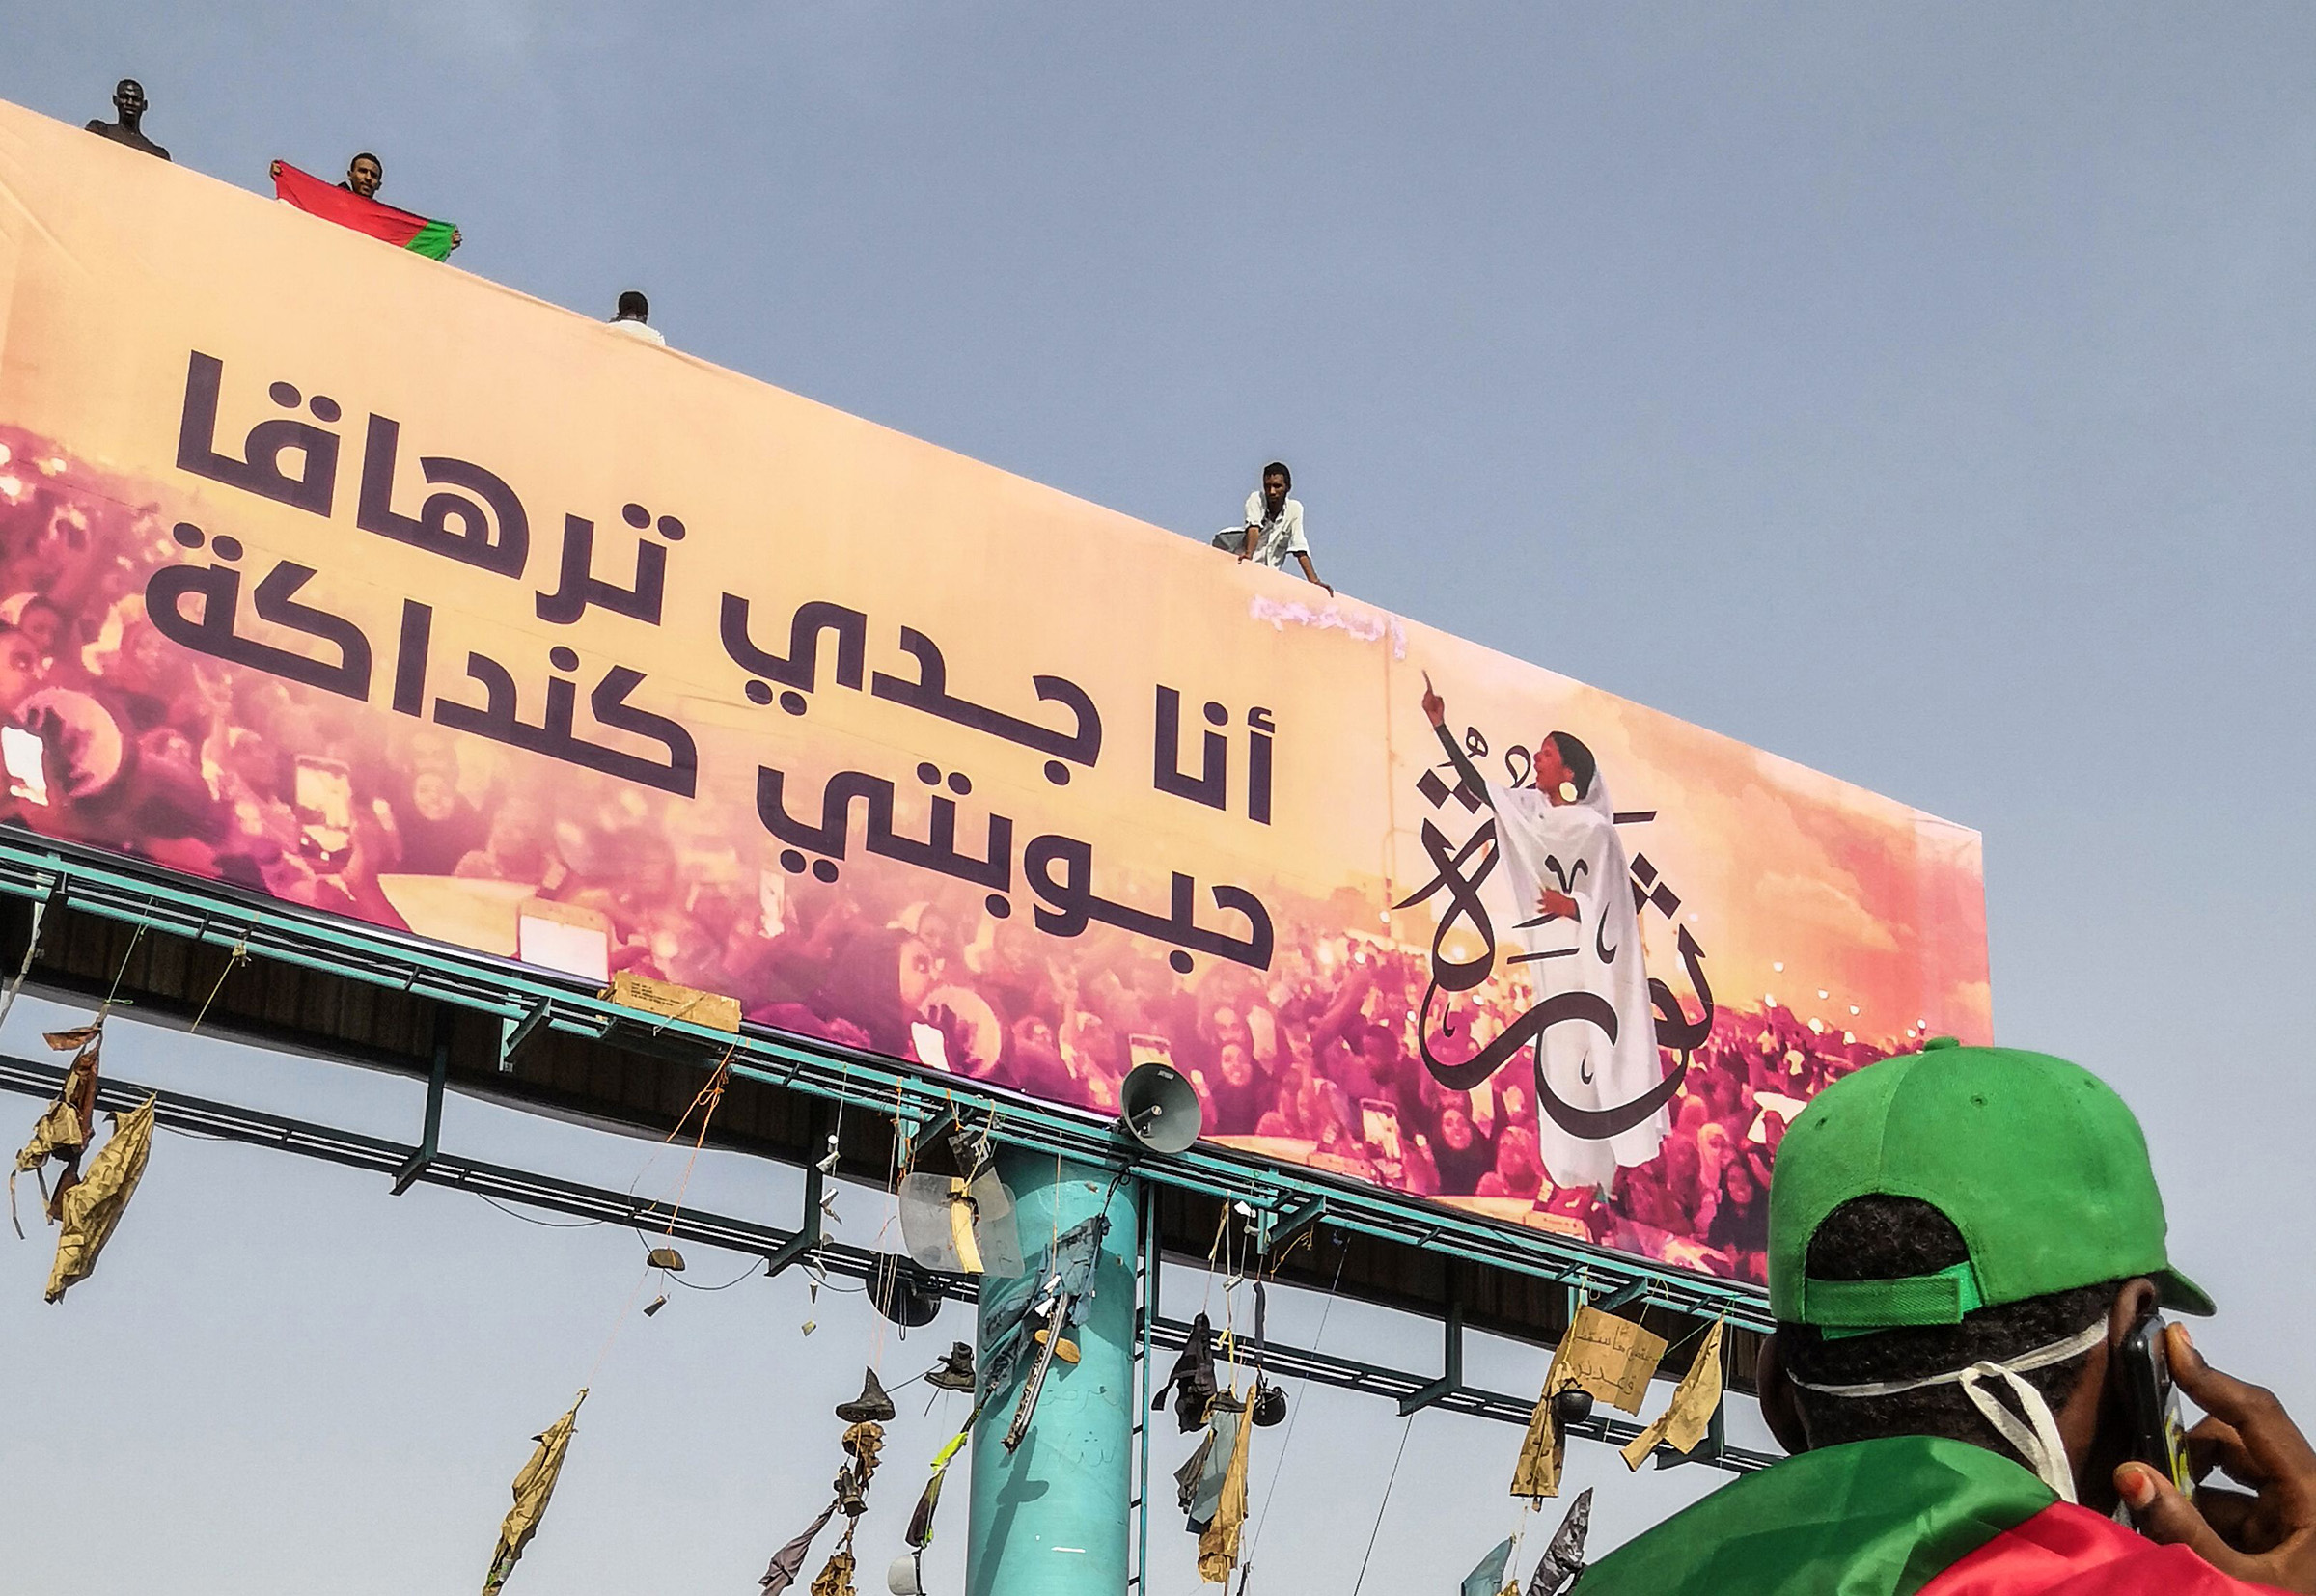 A Sudanese anti-regime protester speaks on his mobile telephone in Khartoum as he walks past a huge billboard bearing an image of Alaa Salah on on April 11, 2019. (AFP/Getty Images)